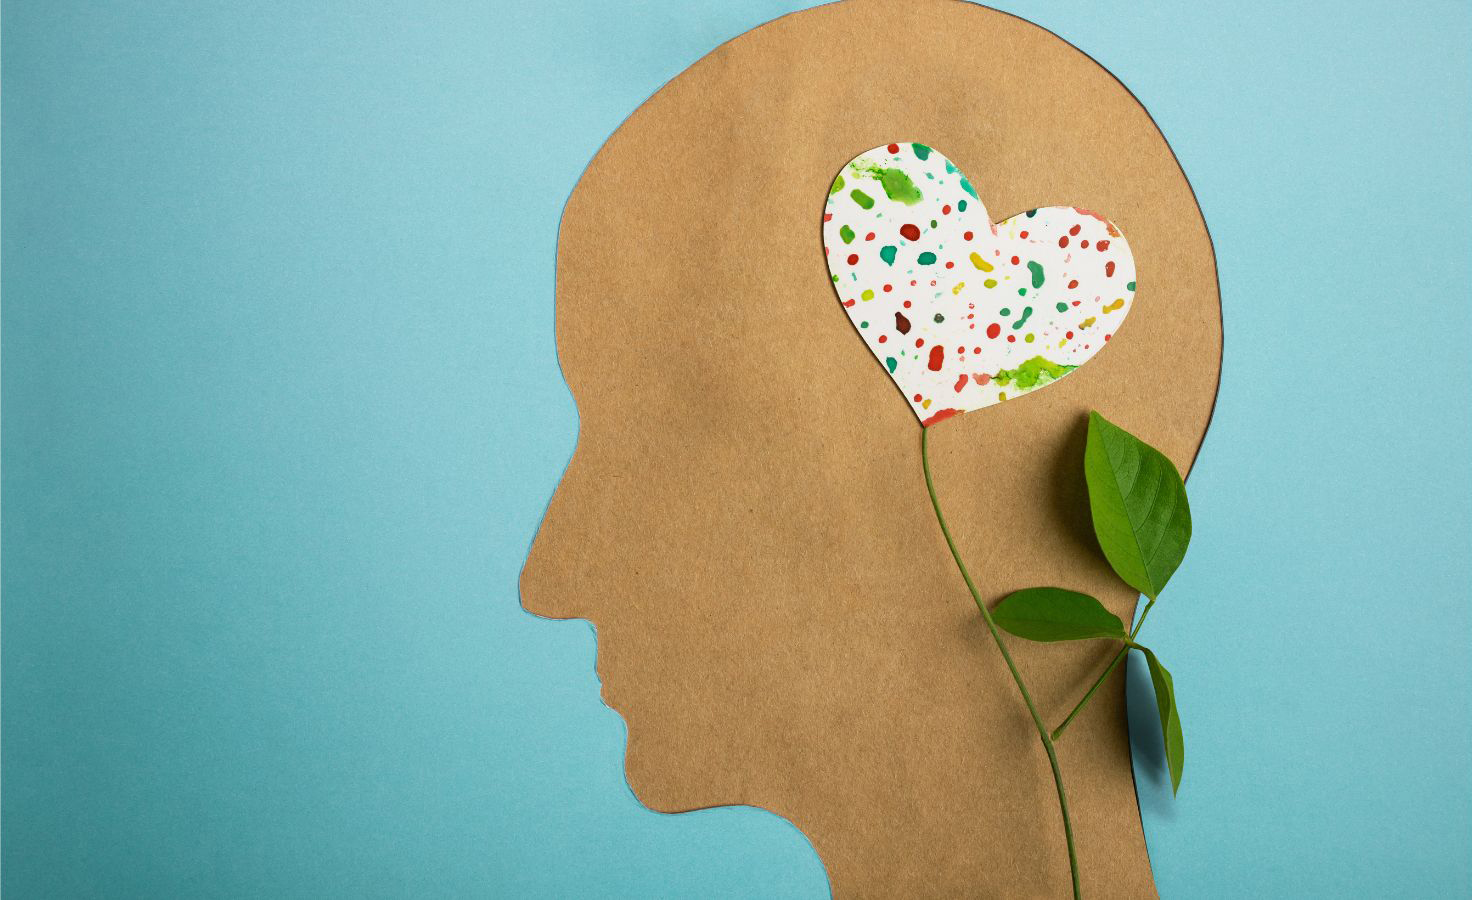 Stock photo of head silhouette with heart and leaves inside